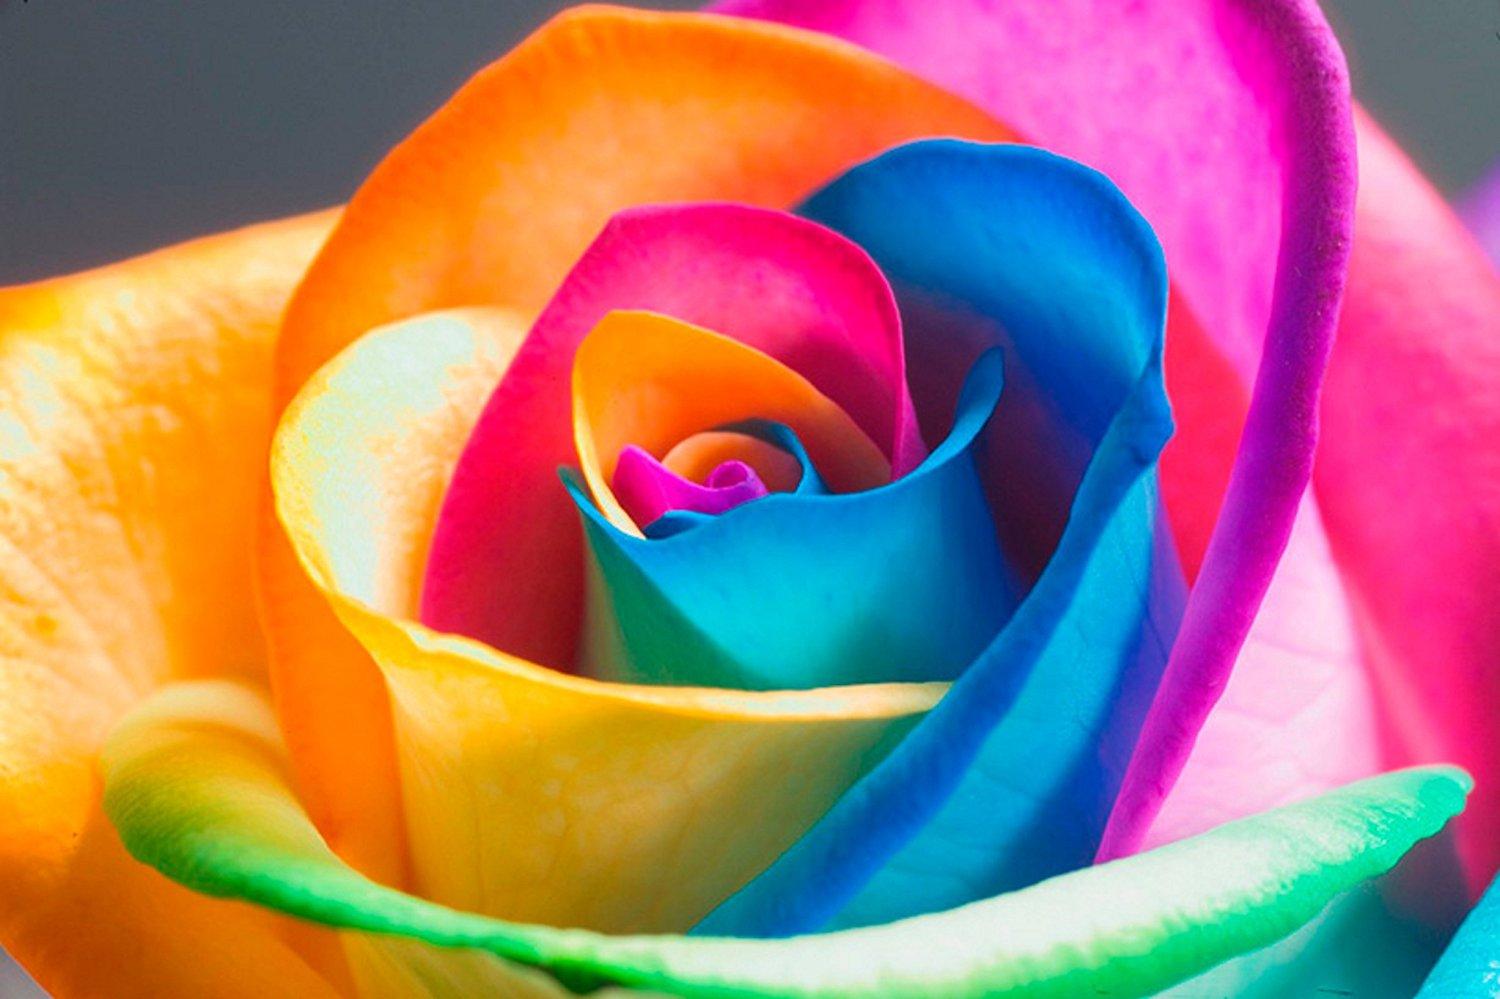 Rainbow Rose Wallpaper, Download picture of a animated HD rainbow